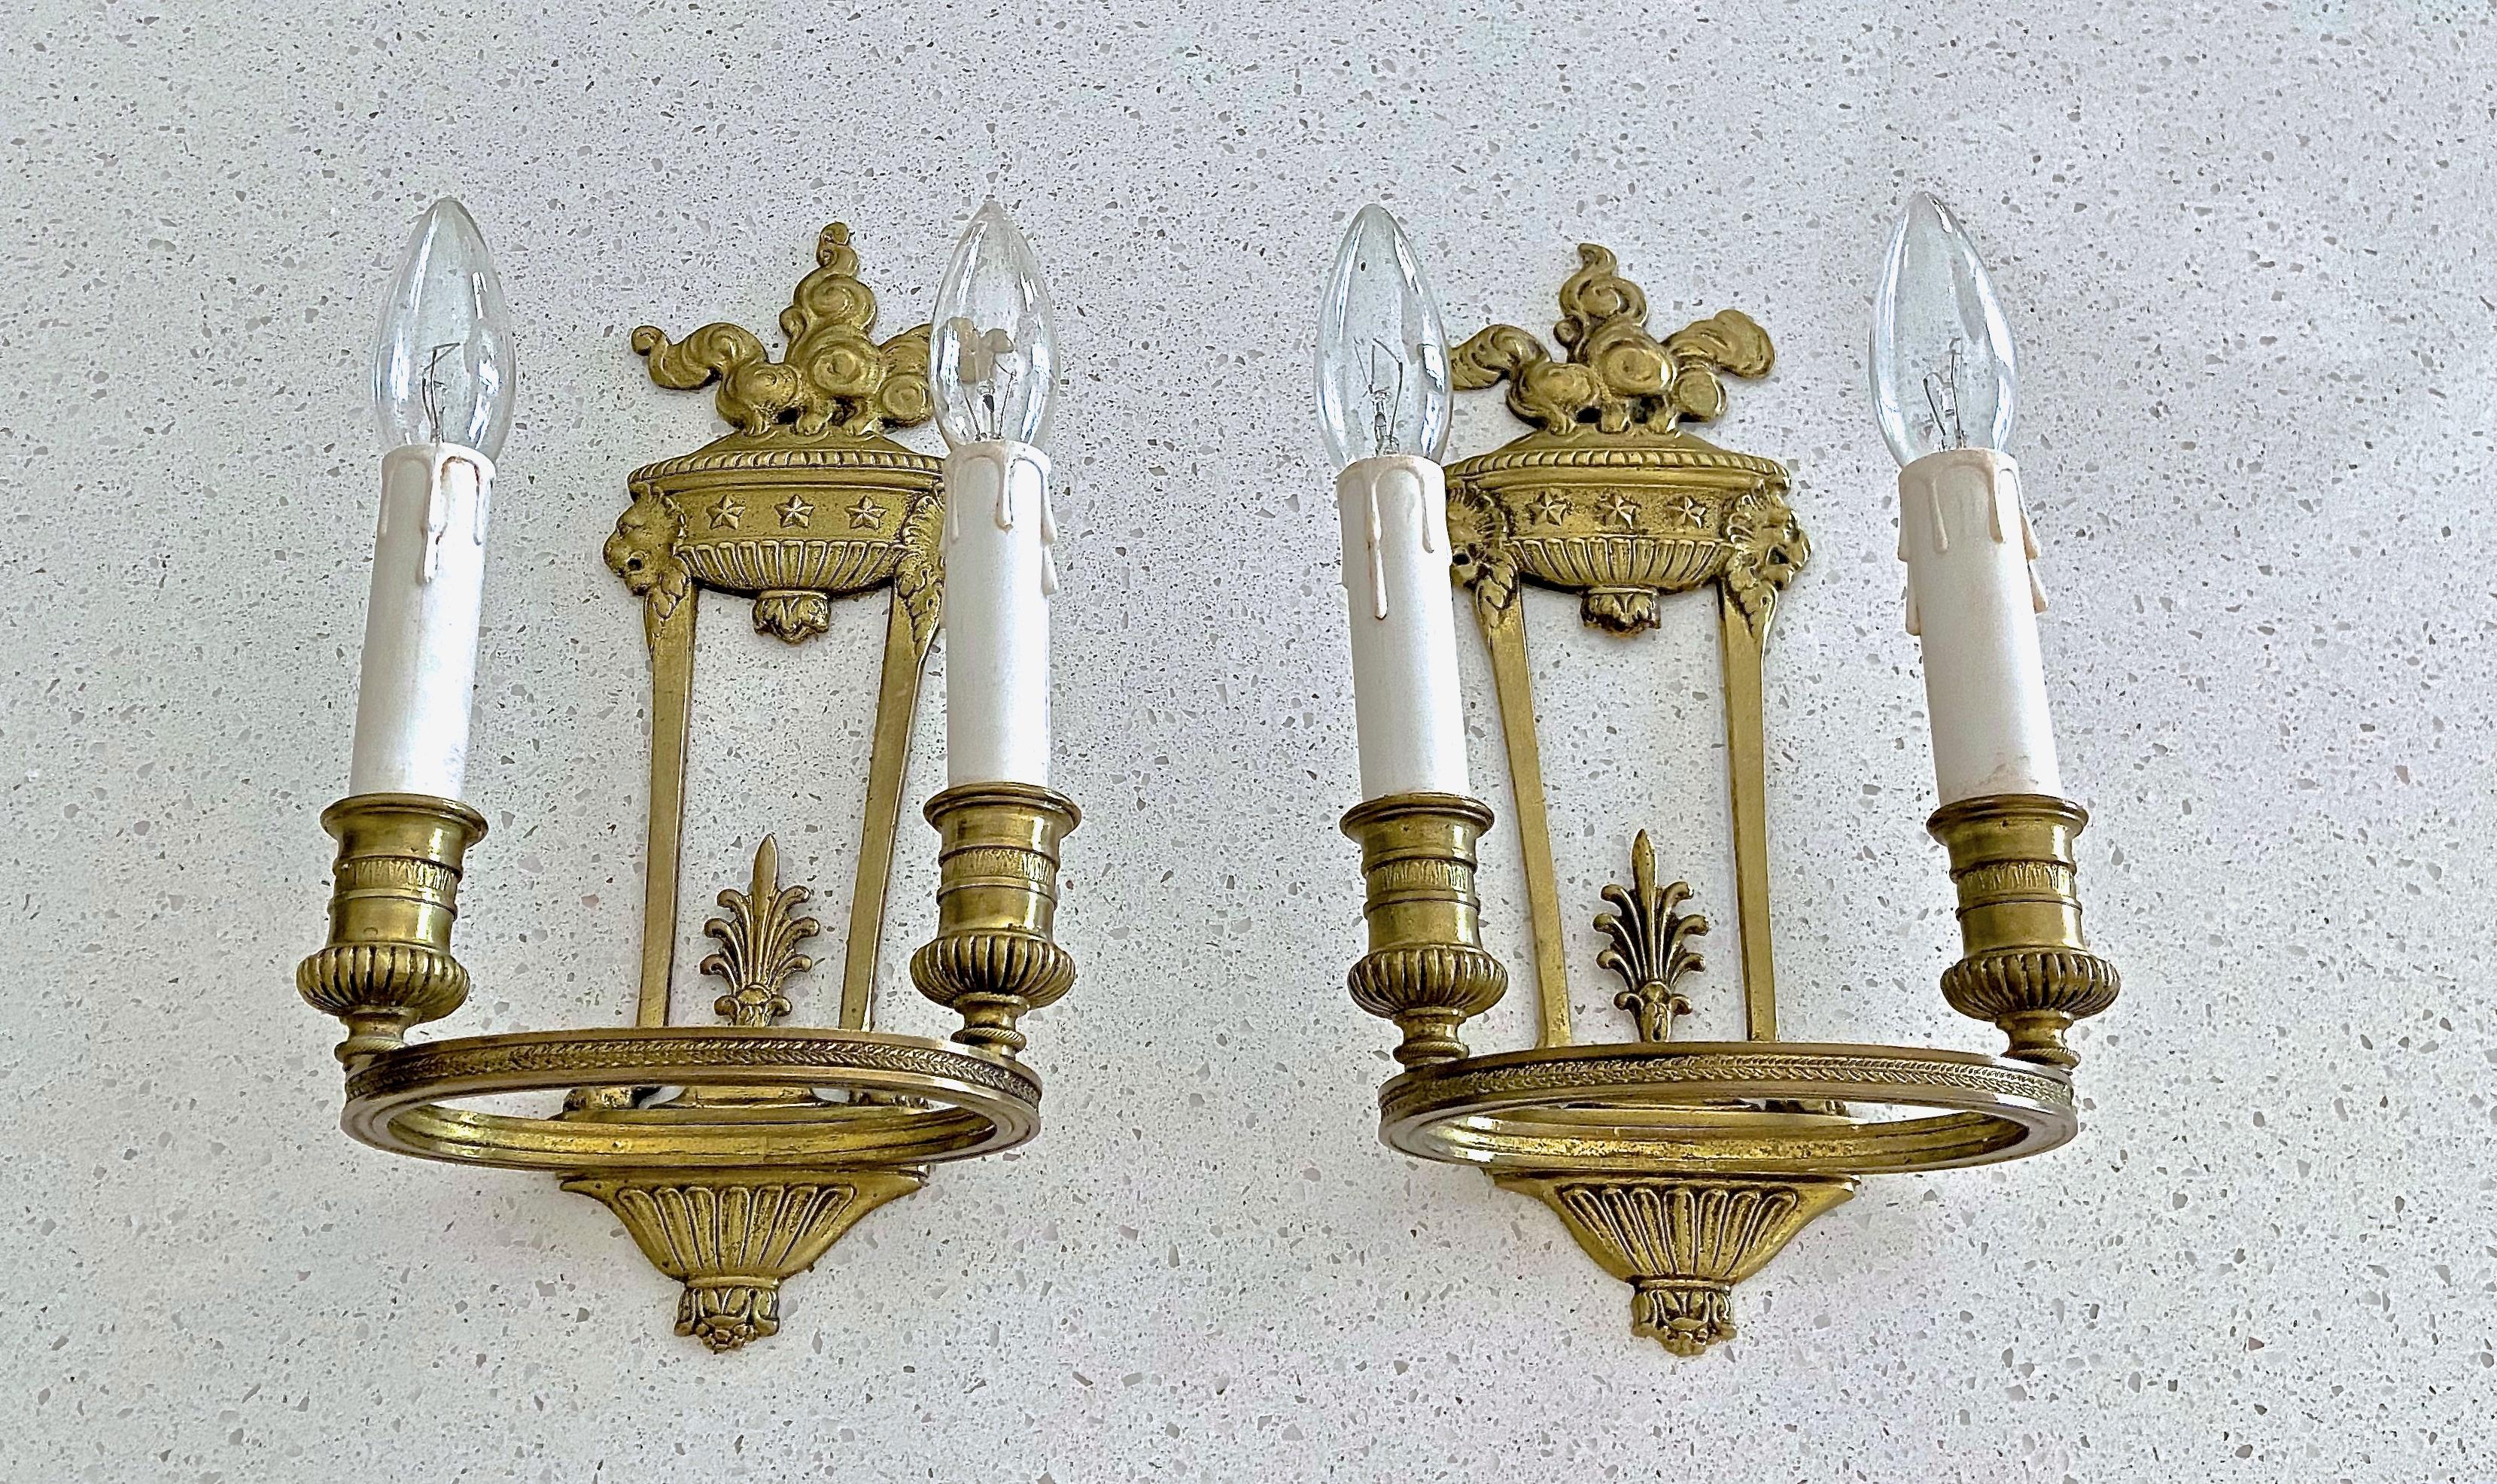 Pair of nicely detailed French 1920s Empire style two light wall sconces with lion and star motif. The sconce frame attaches to wall using a hook (see close up showing where the hook attaches). If needed will provide a 5